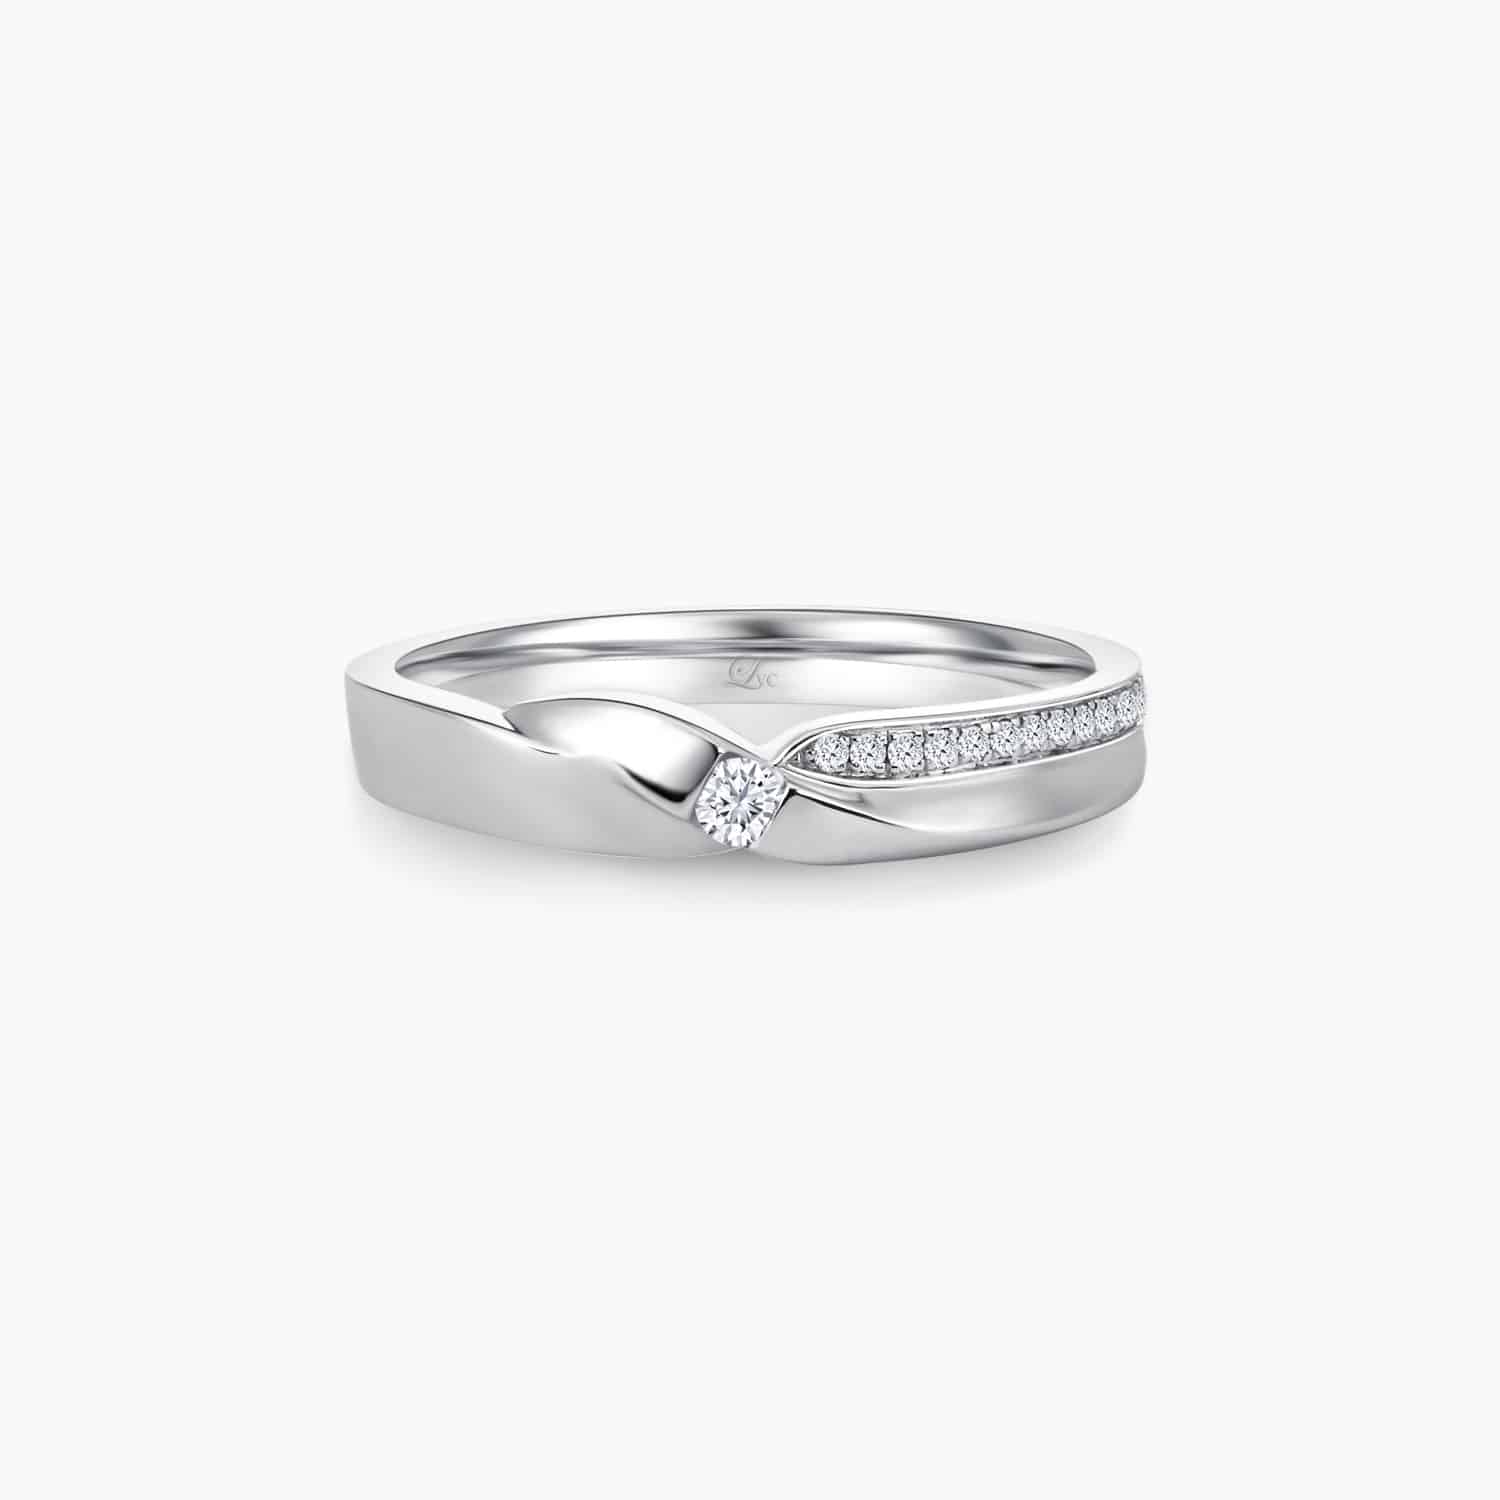 LVC DESIRIO PASSION WEDDING BAND IN WHITE GOLD WITH A CENTER DIAMOND INLAY a white gold engagement wedding ring or wedding band for women in 18k white gold with 16 diamonds 钻石 戒指 cincin diamond